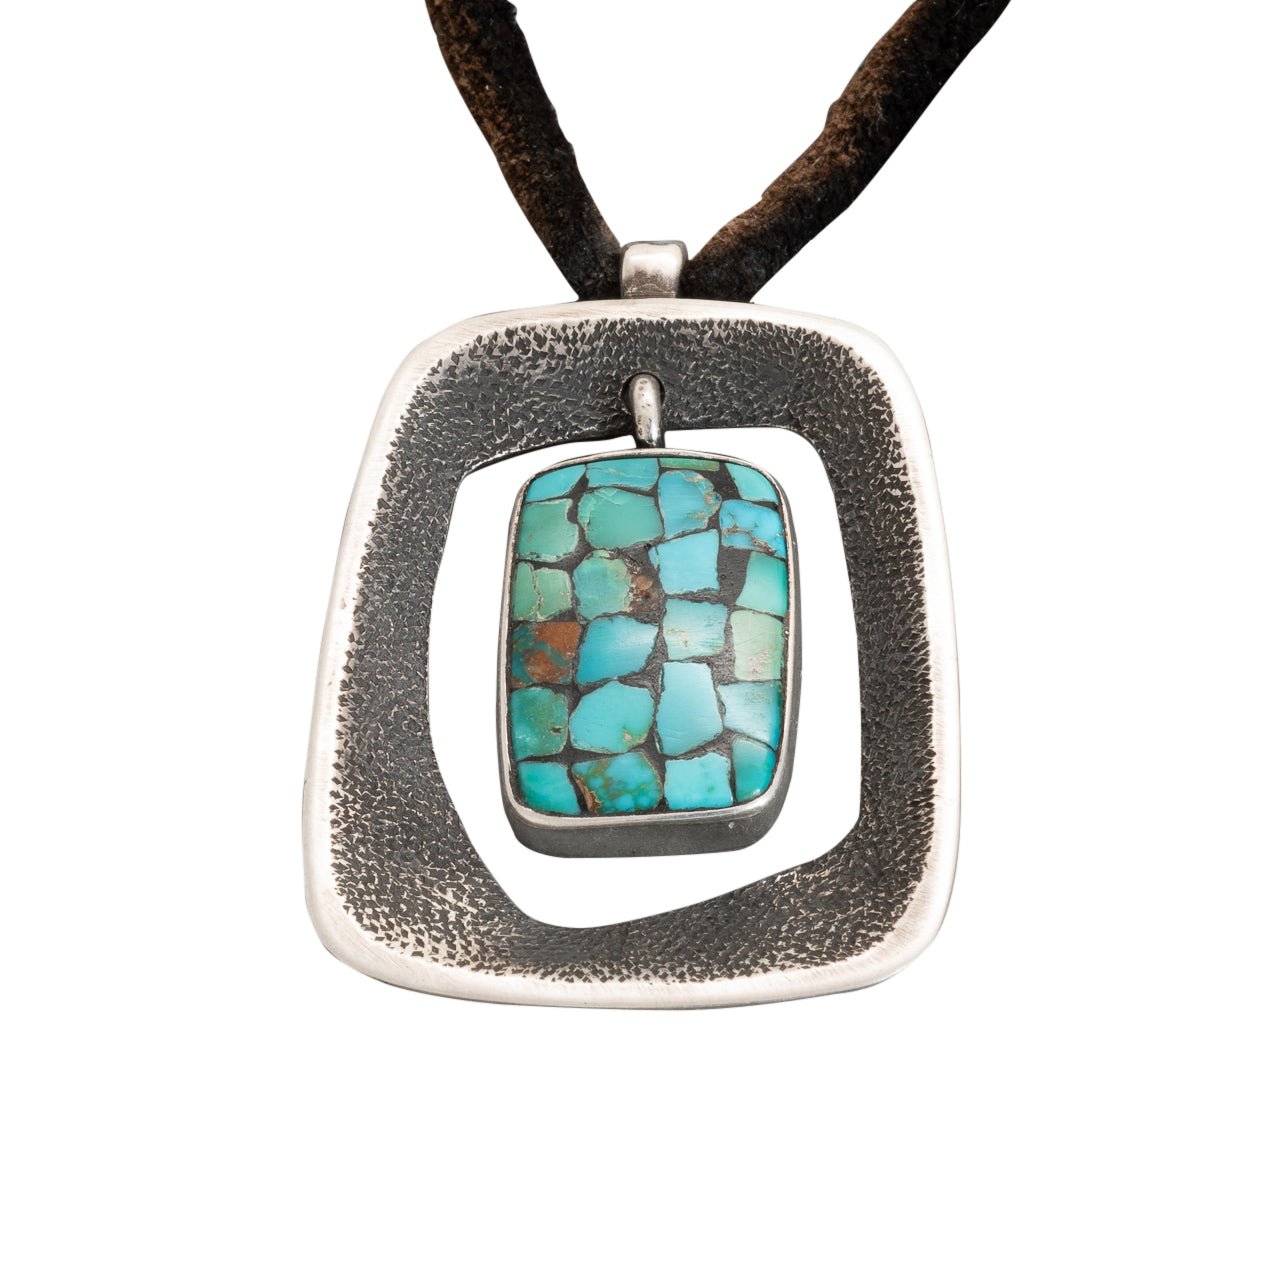 Vintage Modernist Navajo Pendant With Mosaic Inlay Turquoise By Jimmy Herald - Turquoise & Tufa